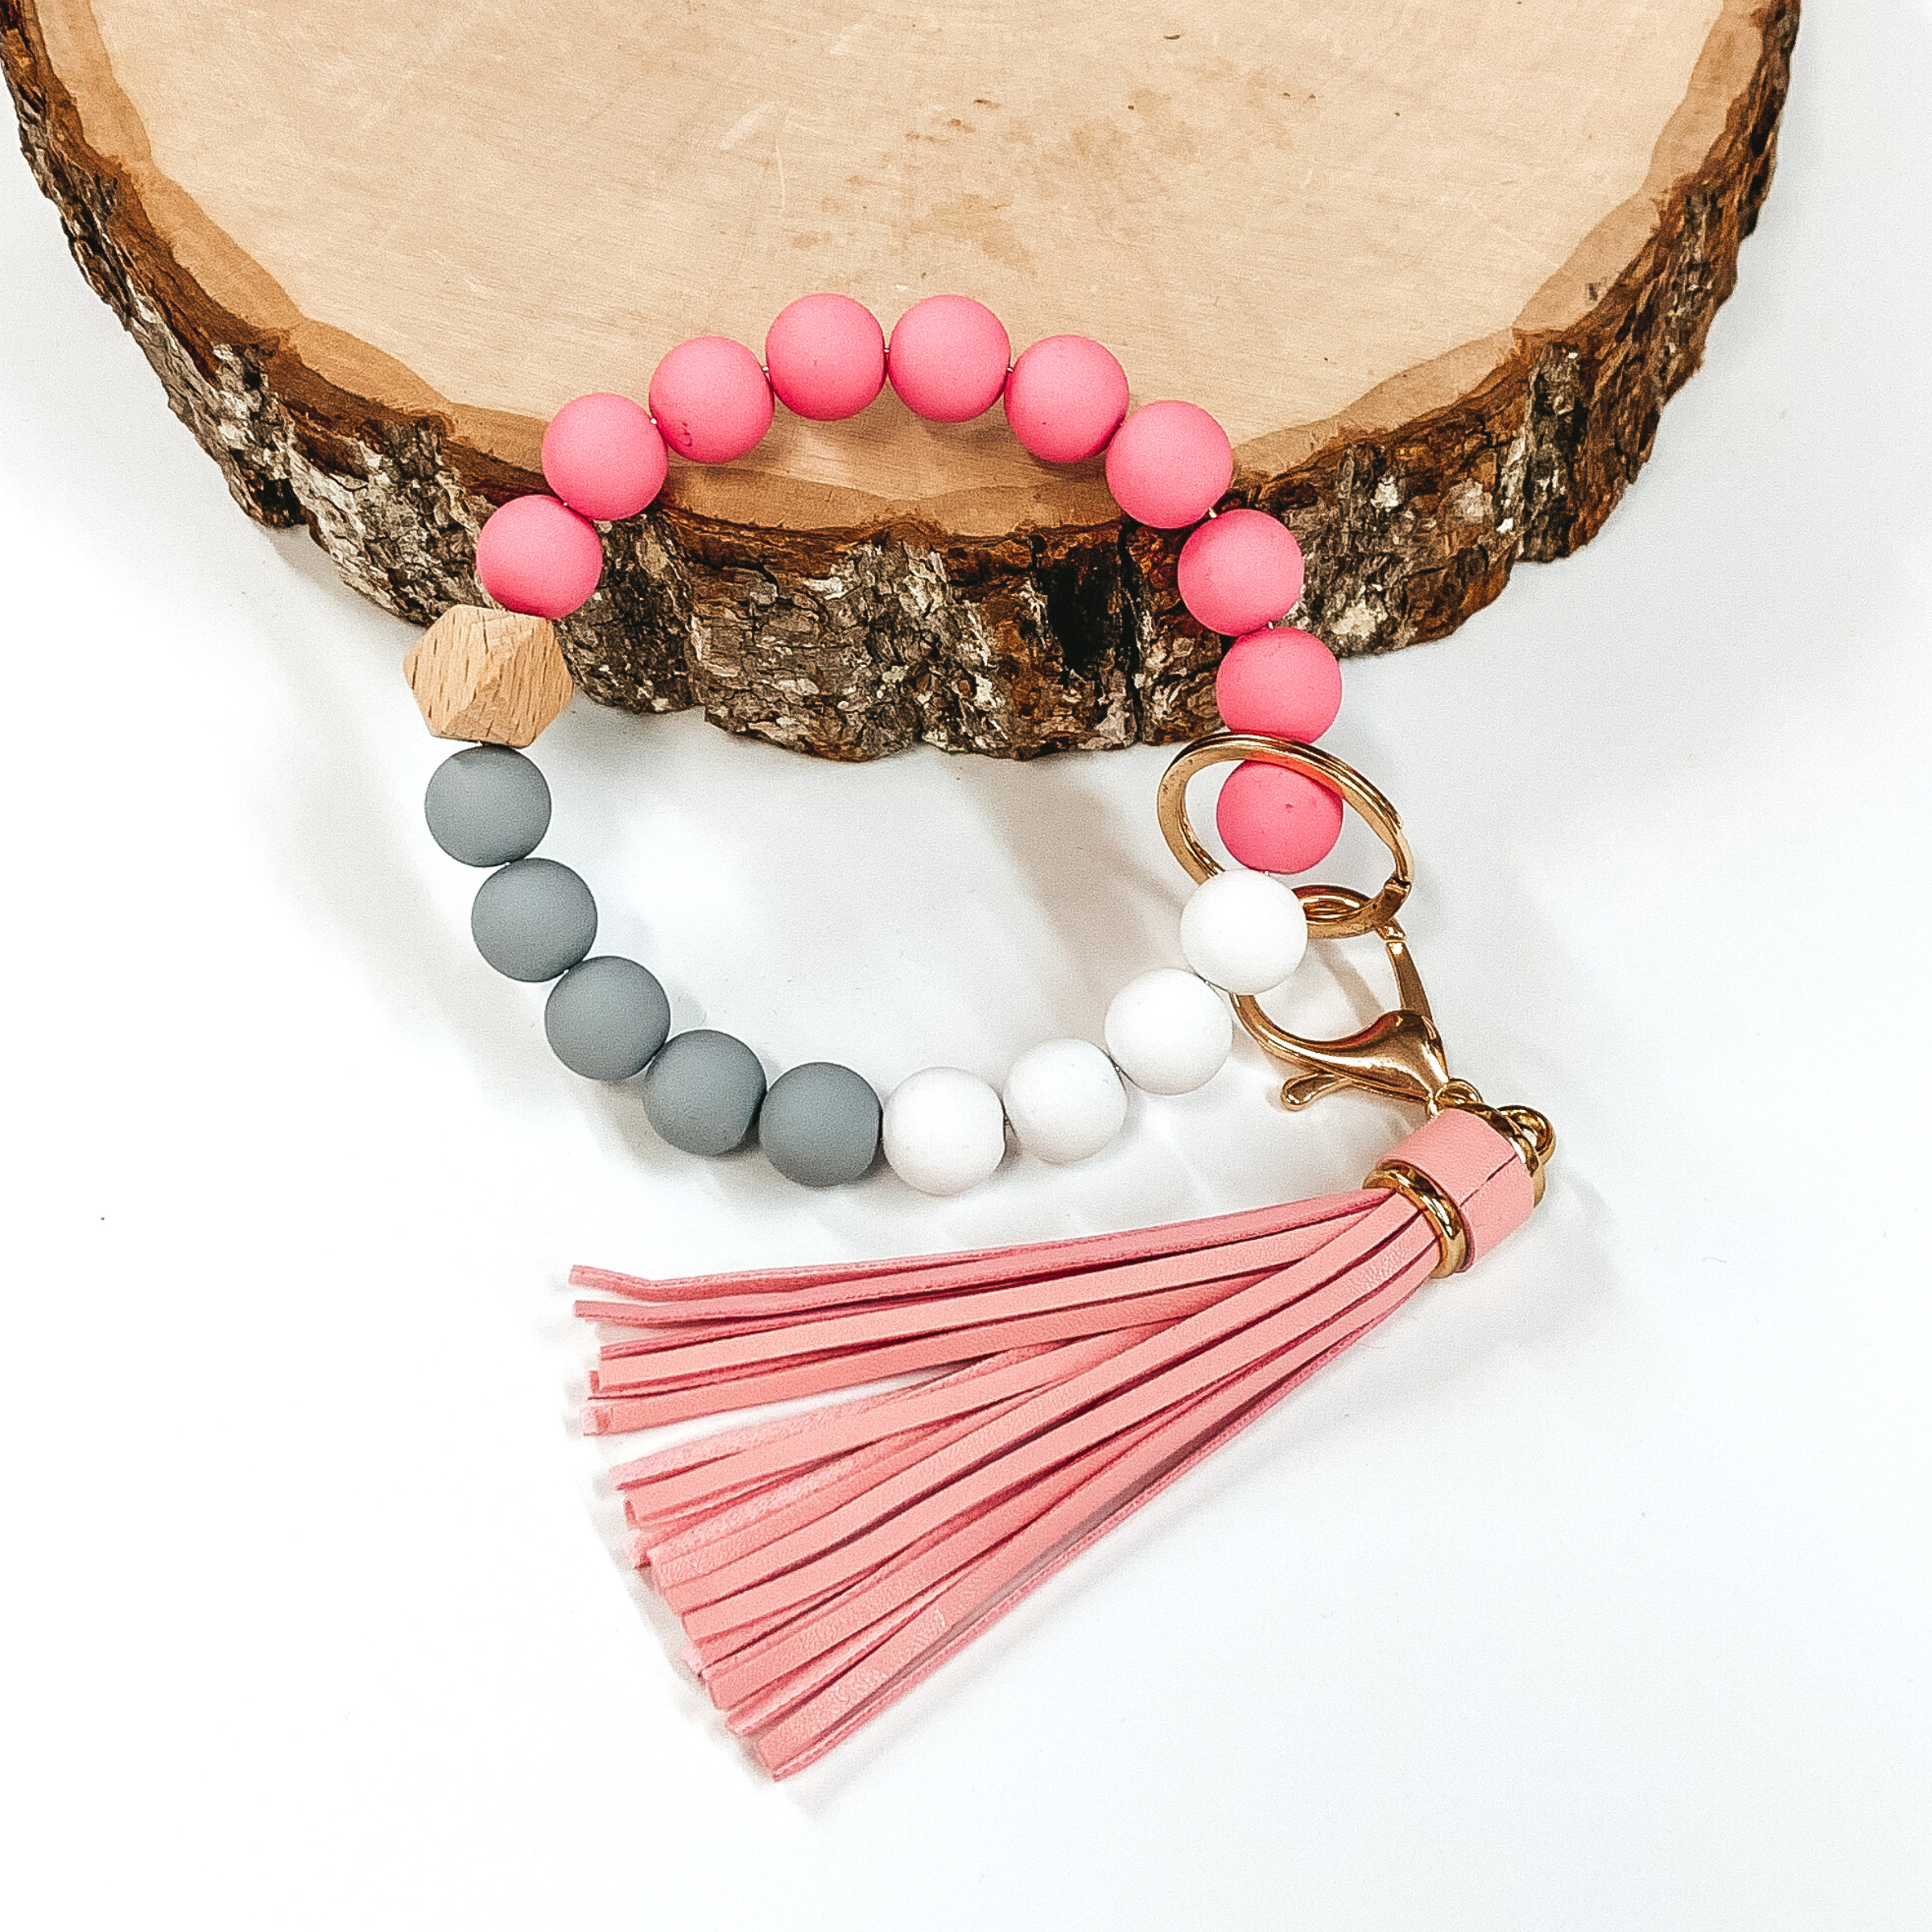 Matte beaded bangle key ring. The key ring includes pink, grey, and white. It also has a gold key ring and clasp with a pink tassel connected. This key ring is pictured laying on a piece of wood on a white background. 